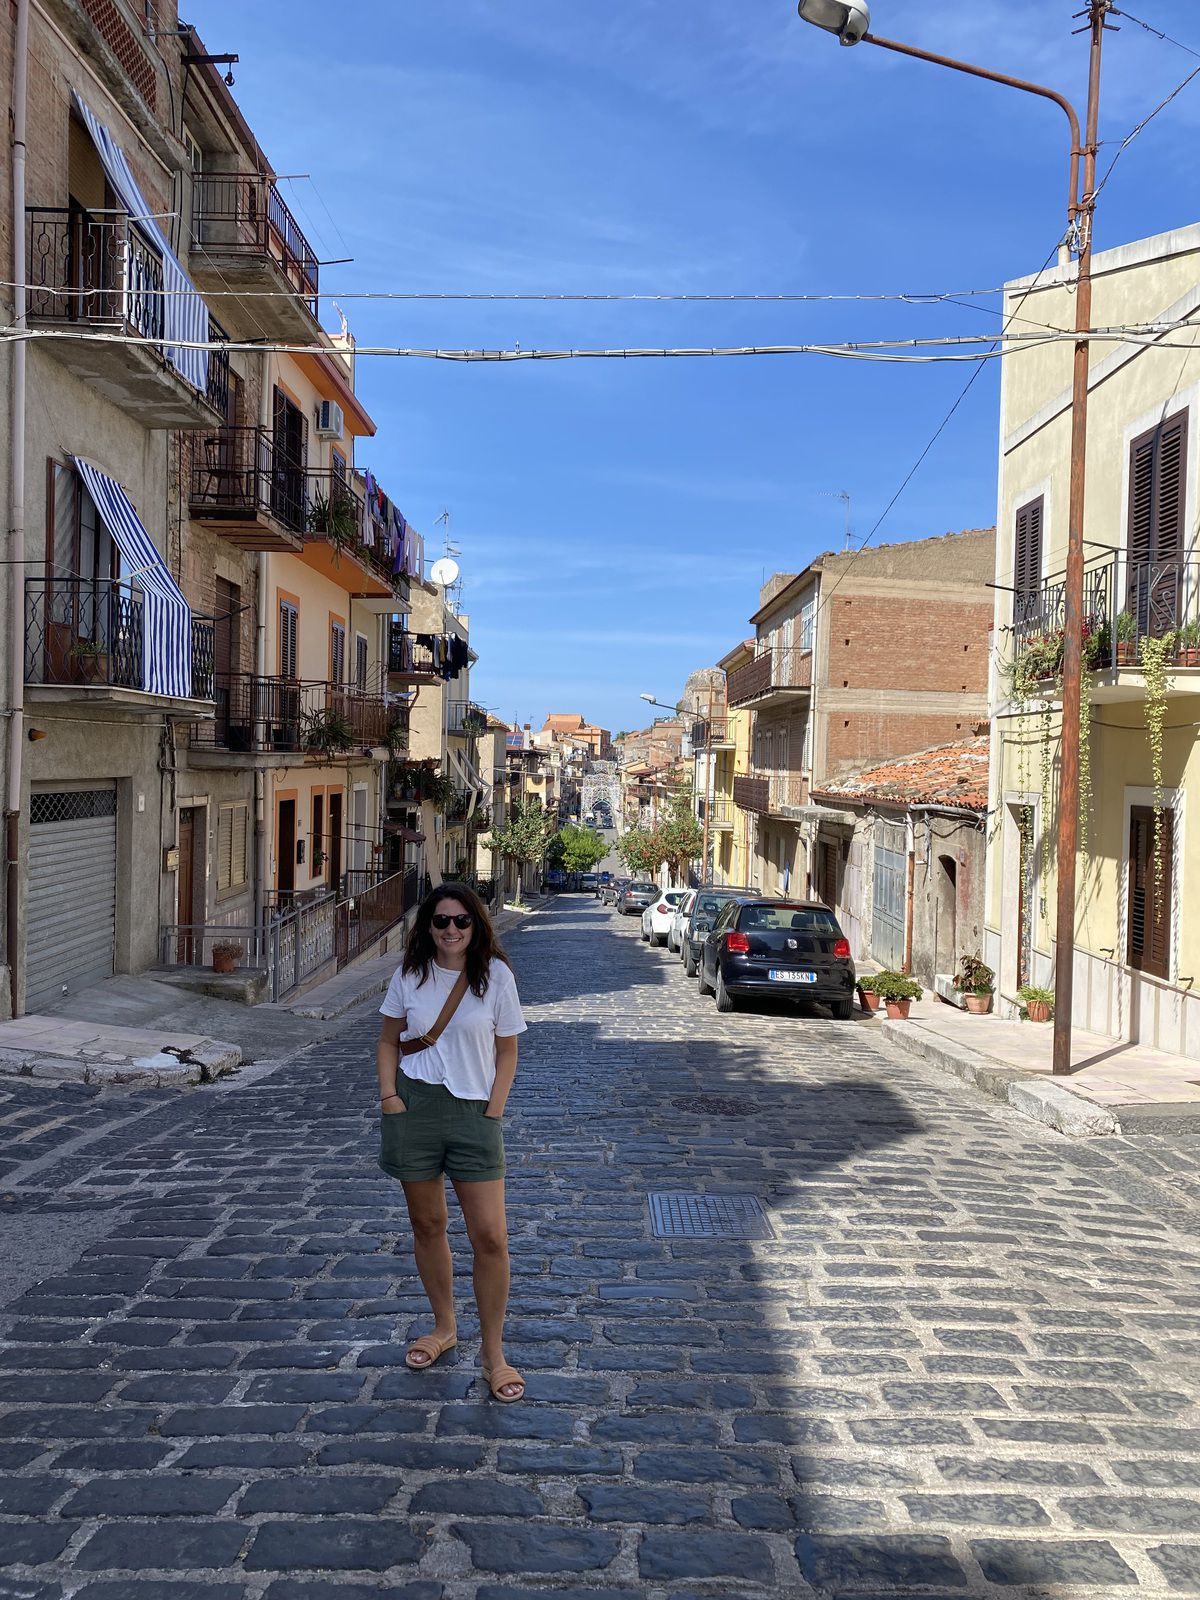 The author visits her great-grandparents’ town of San Fratello in Sicily. (MUST CREDIT: Amanda Finnegan/The Washington Post)  (Amanda Finnegan/The Washington Post)